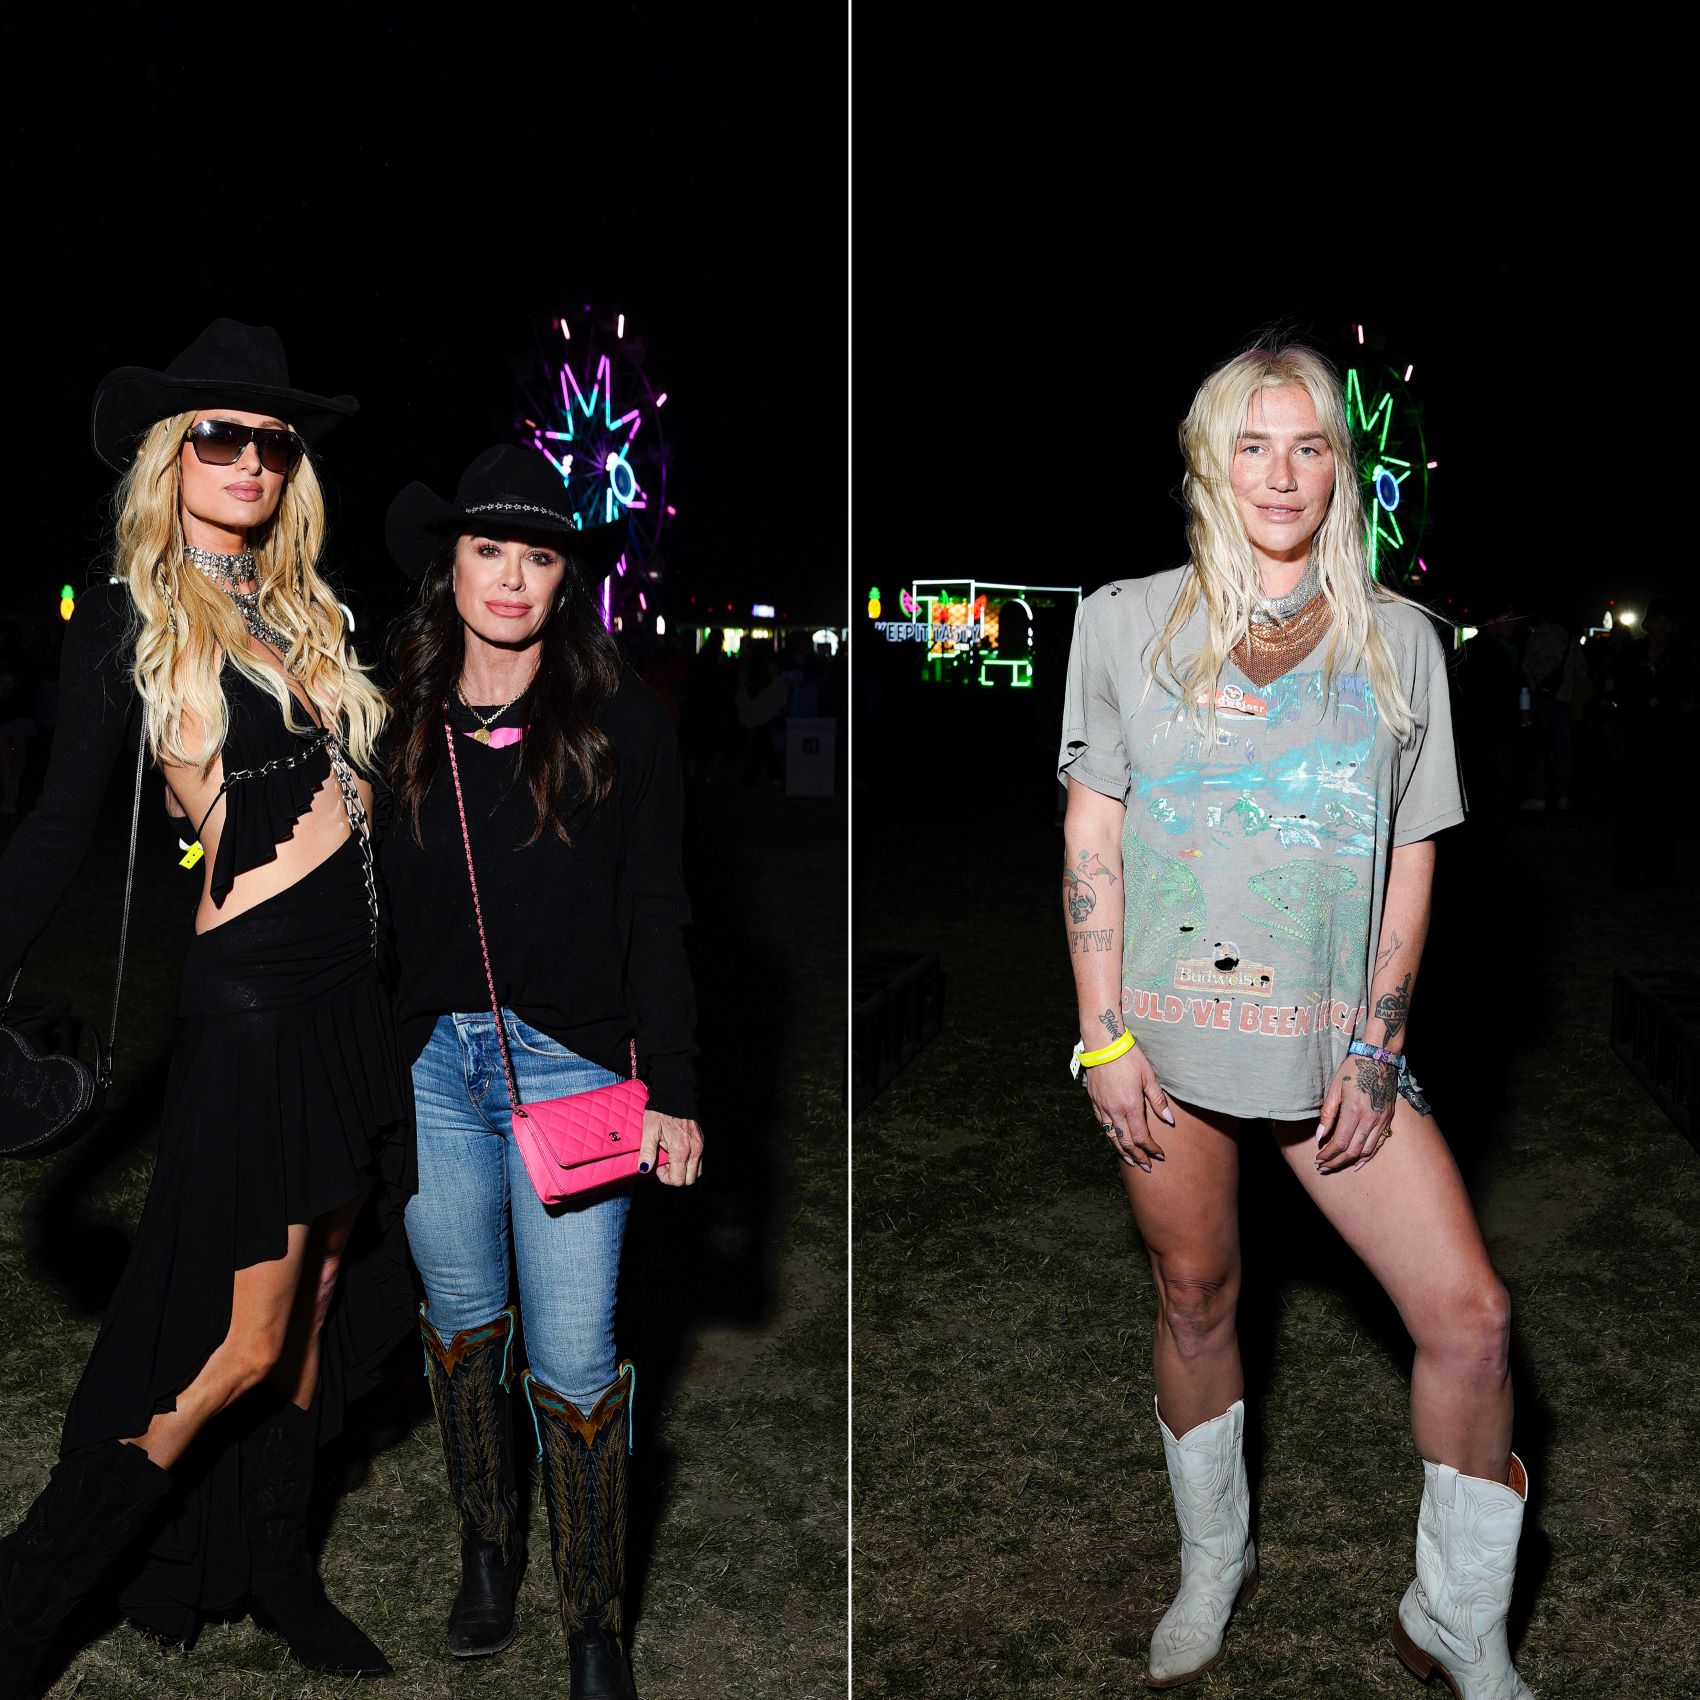 Two images. On the left is Paris Hilton and Kyle Richards, and on the right is Kesha.